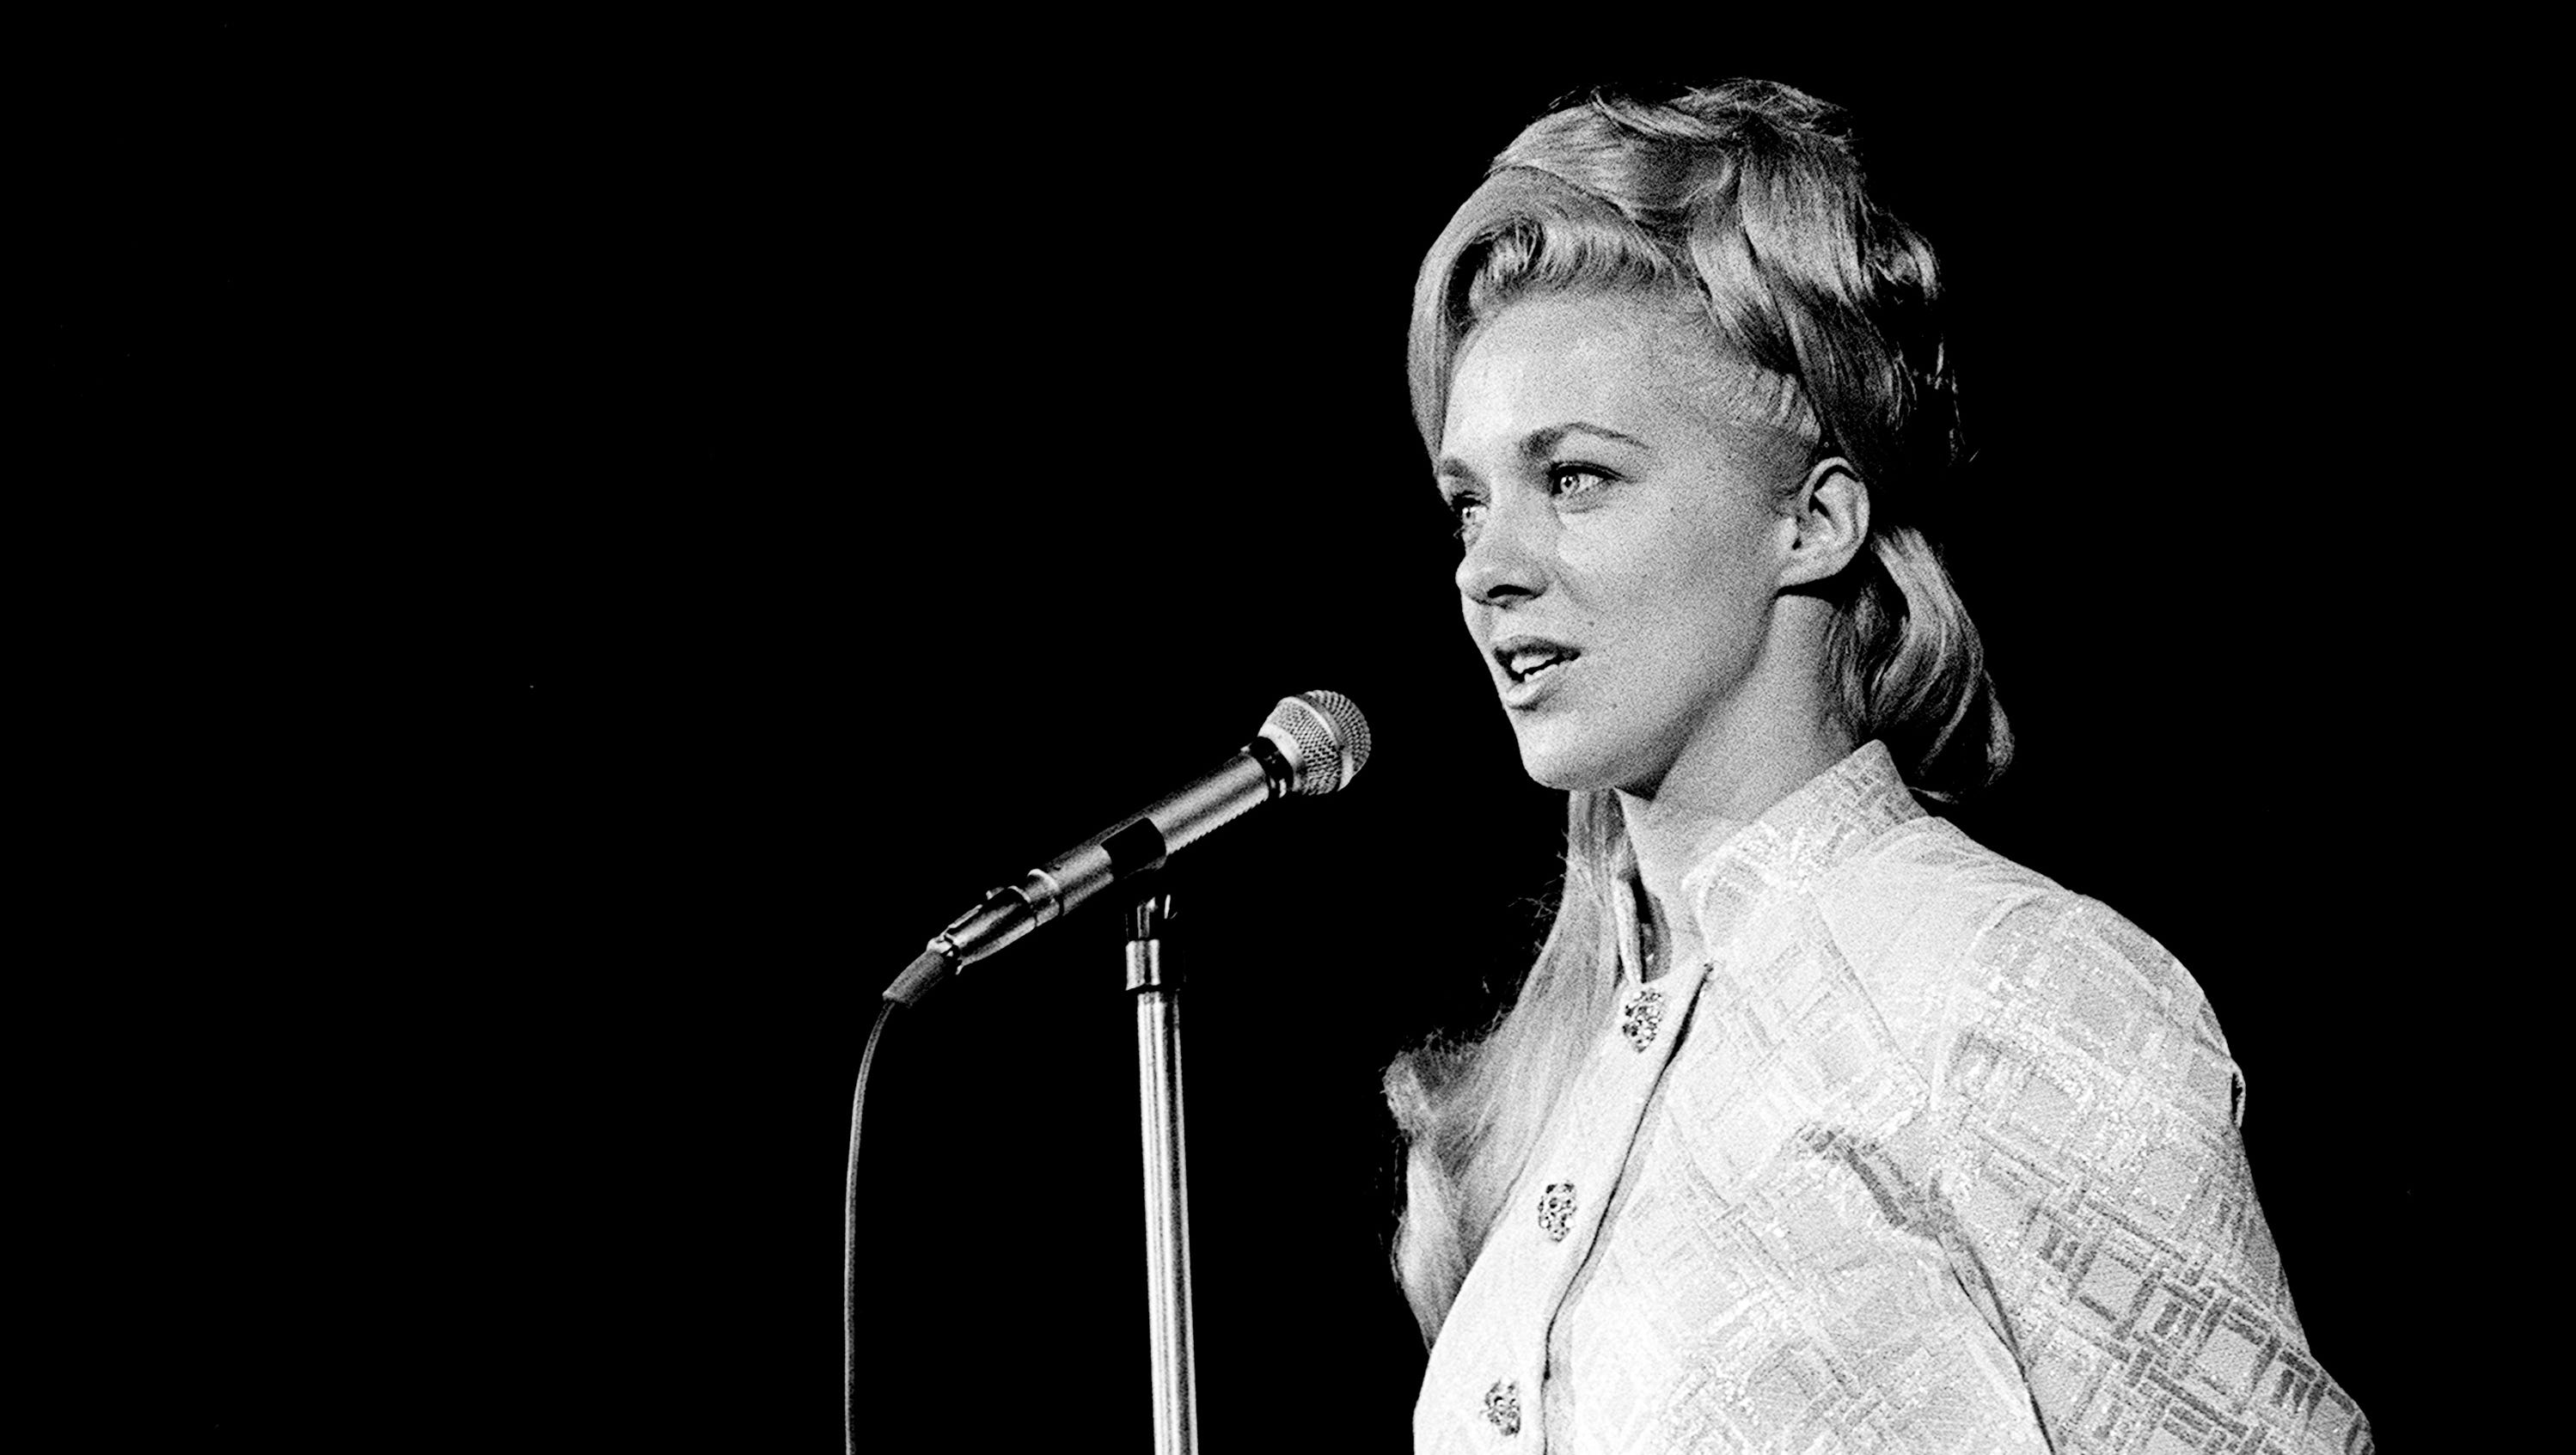 Connie Smith's 'Once a Day' recording launched a legendary career